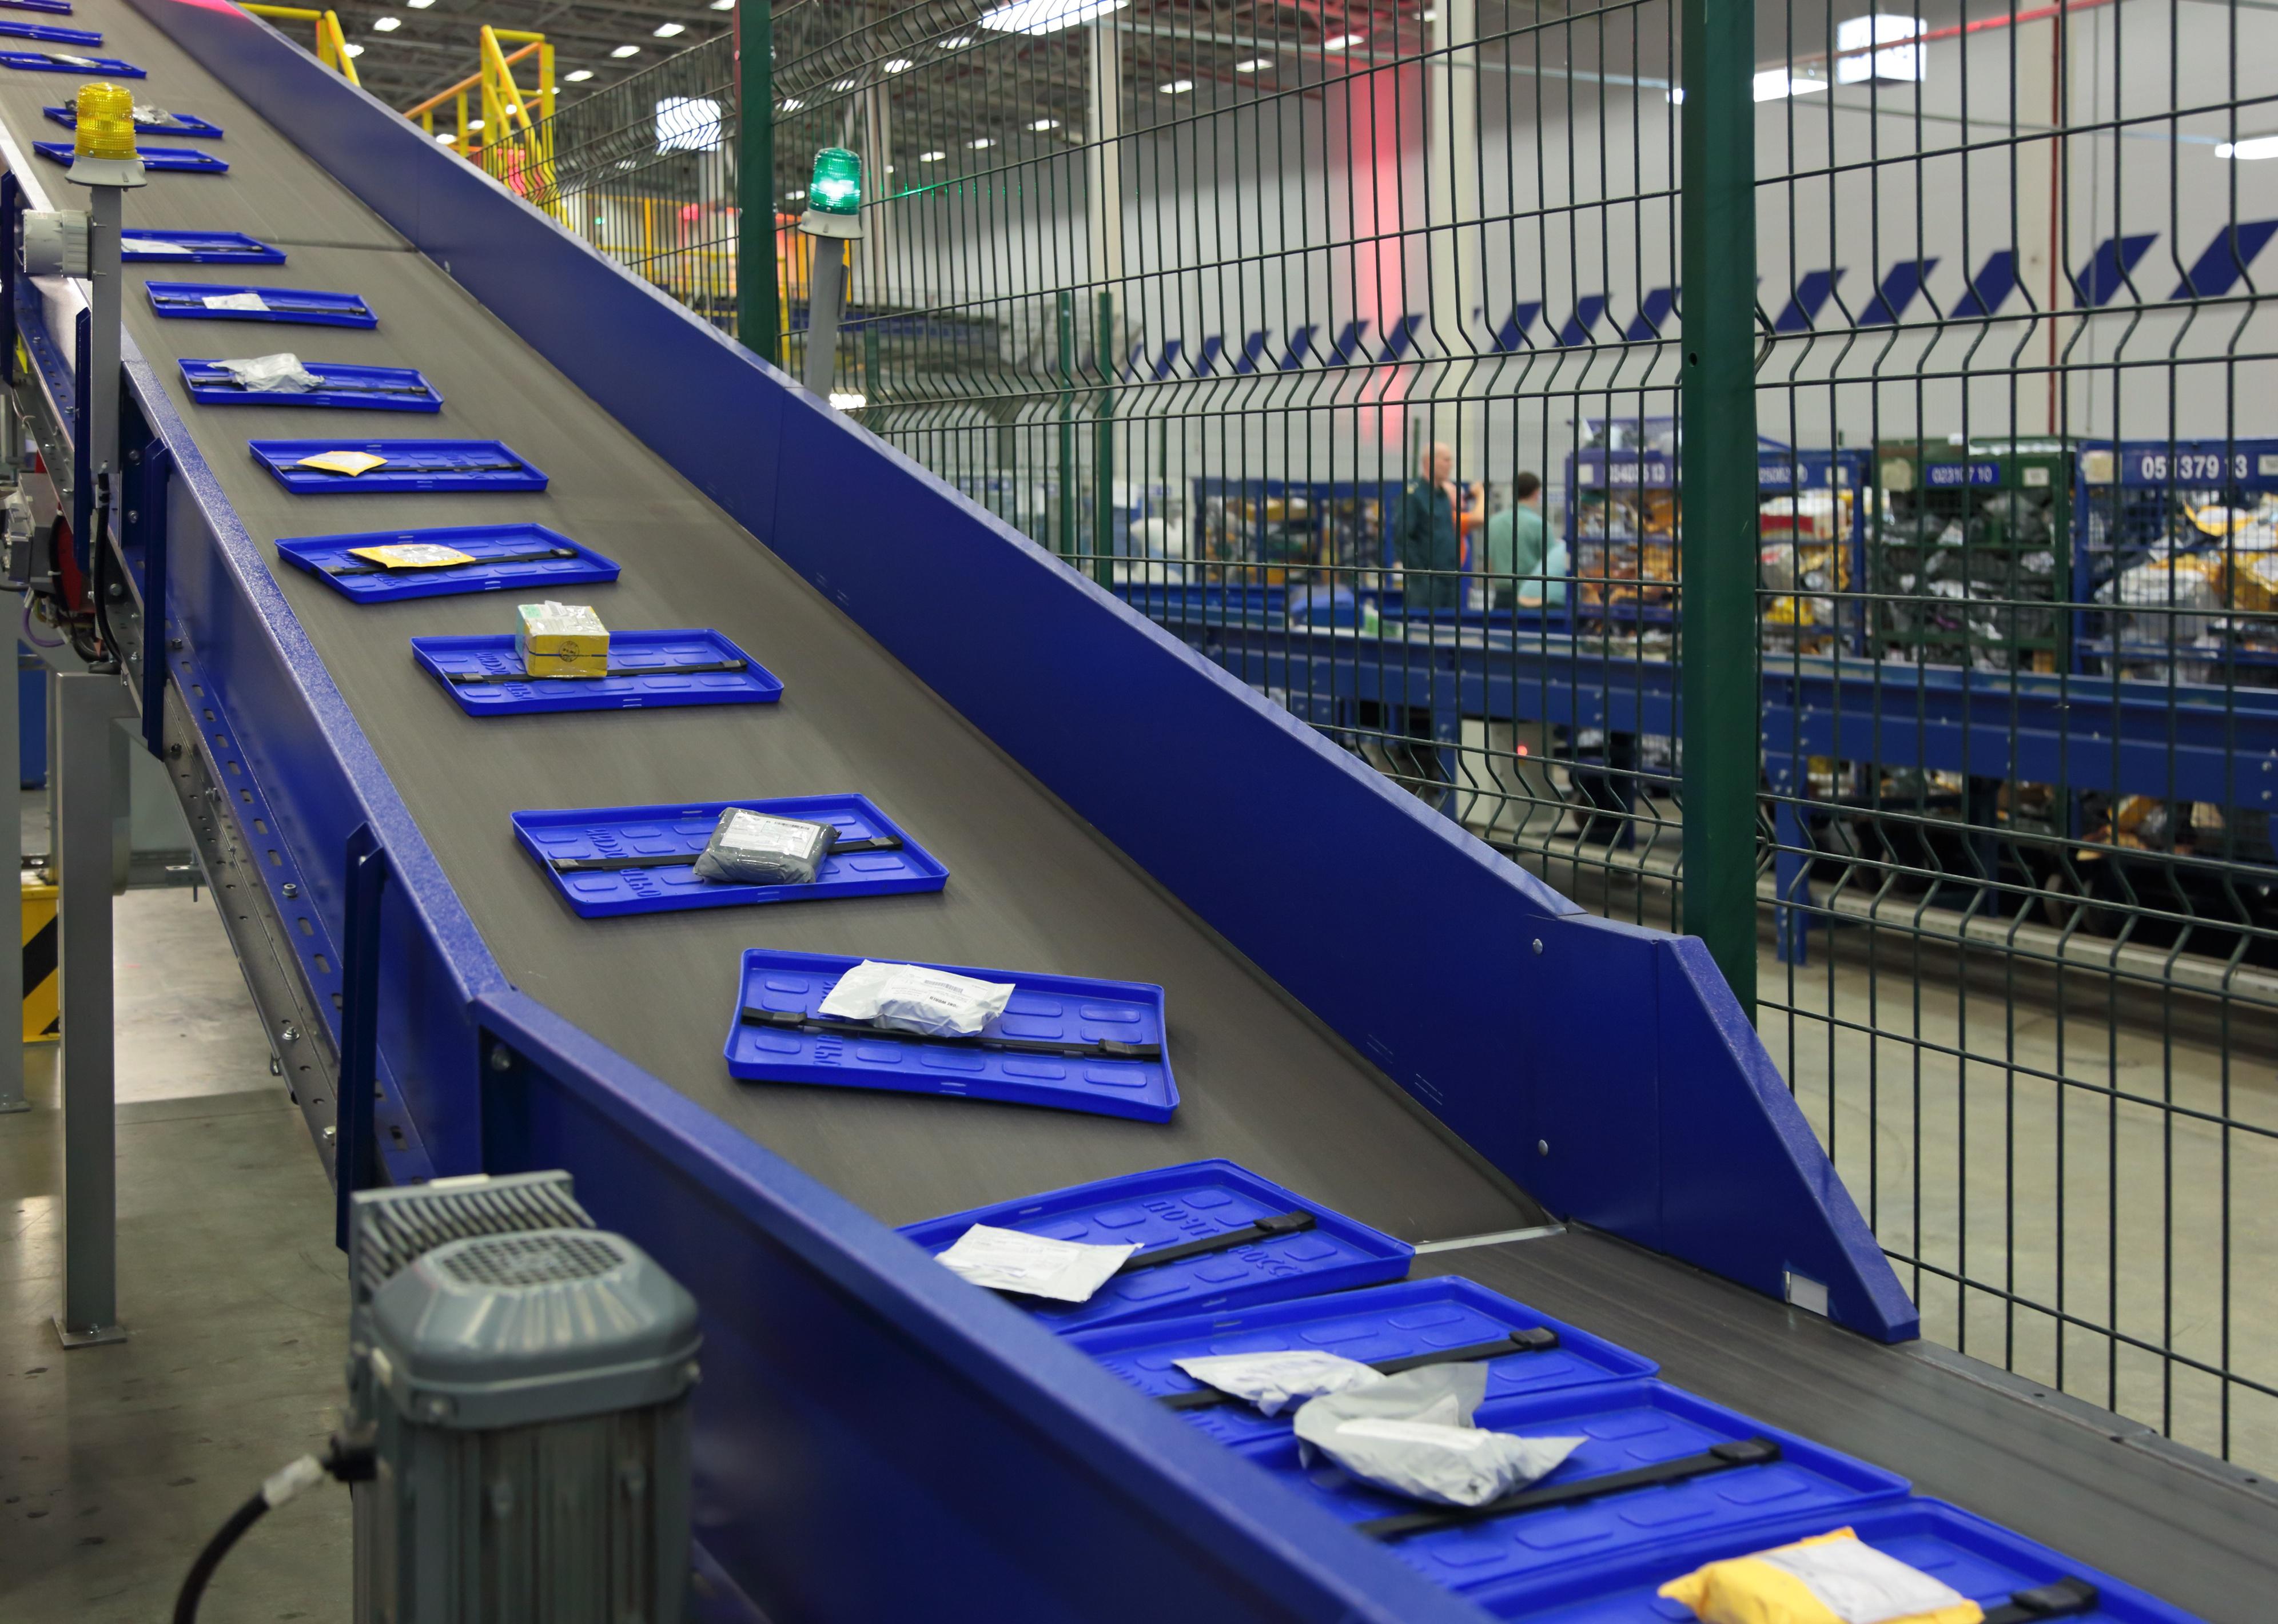 Mail traveling on the conveyor belt.